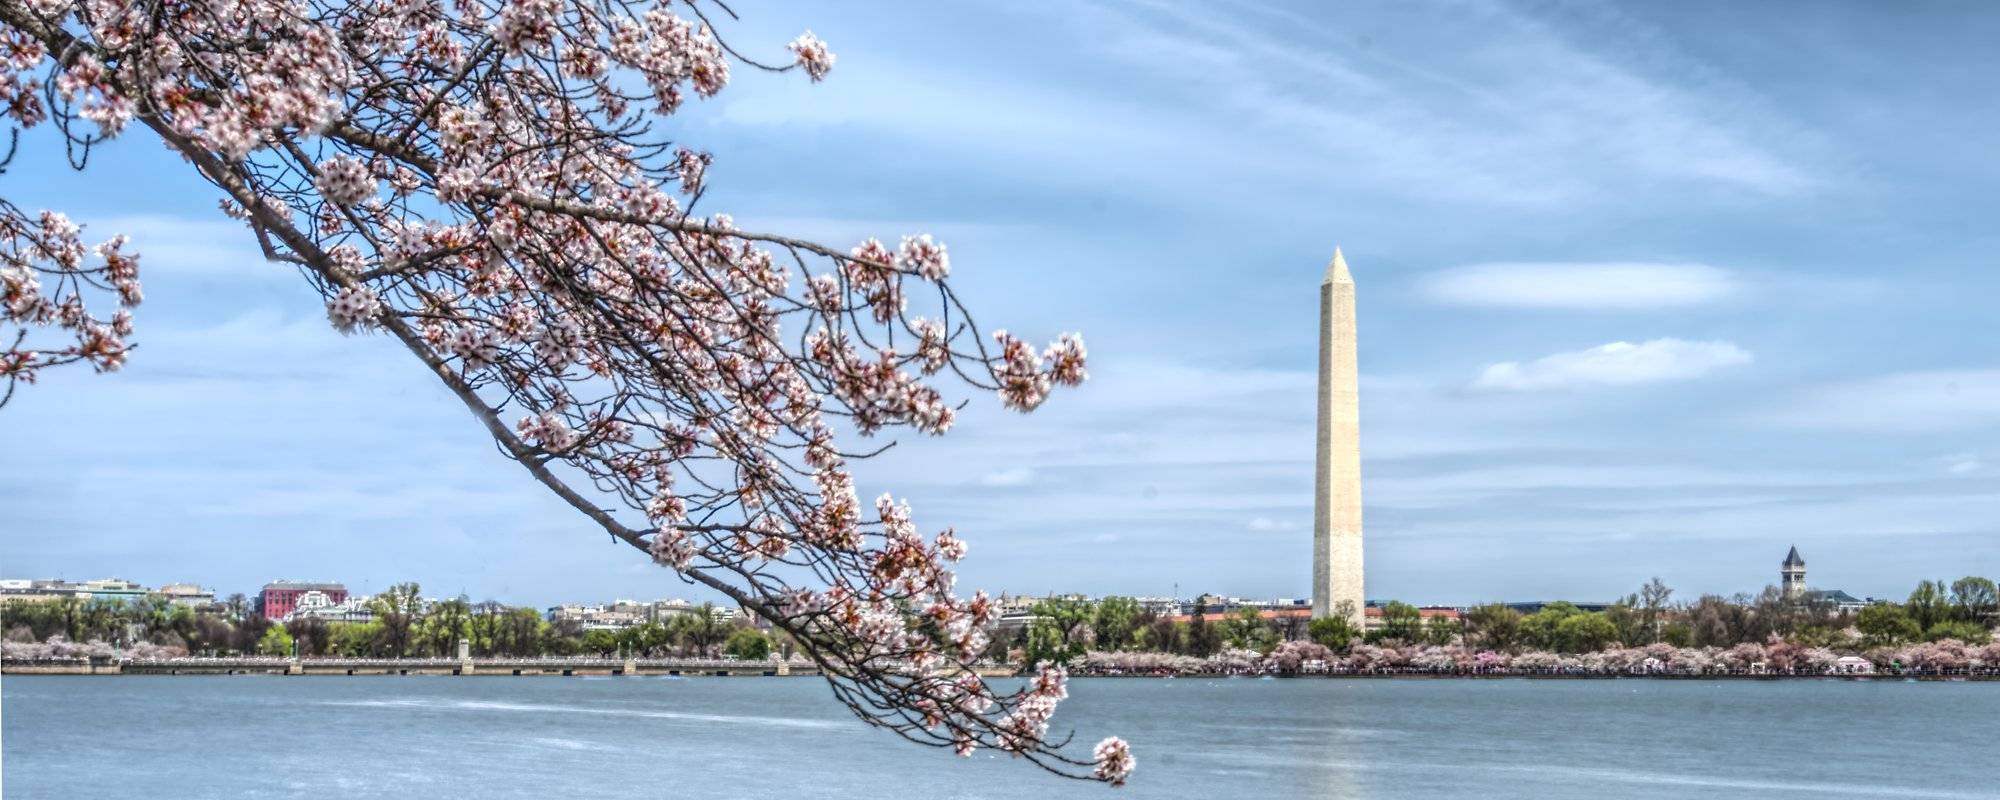 Travel - Visiting the Cherry Blossom Festival in Washington DC